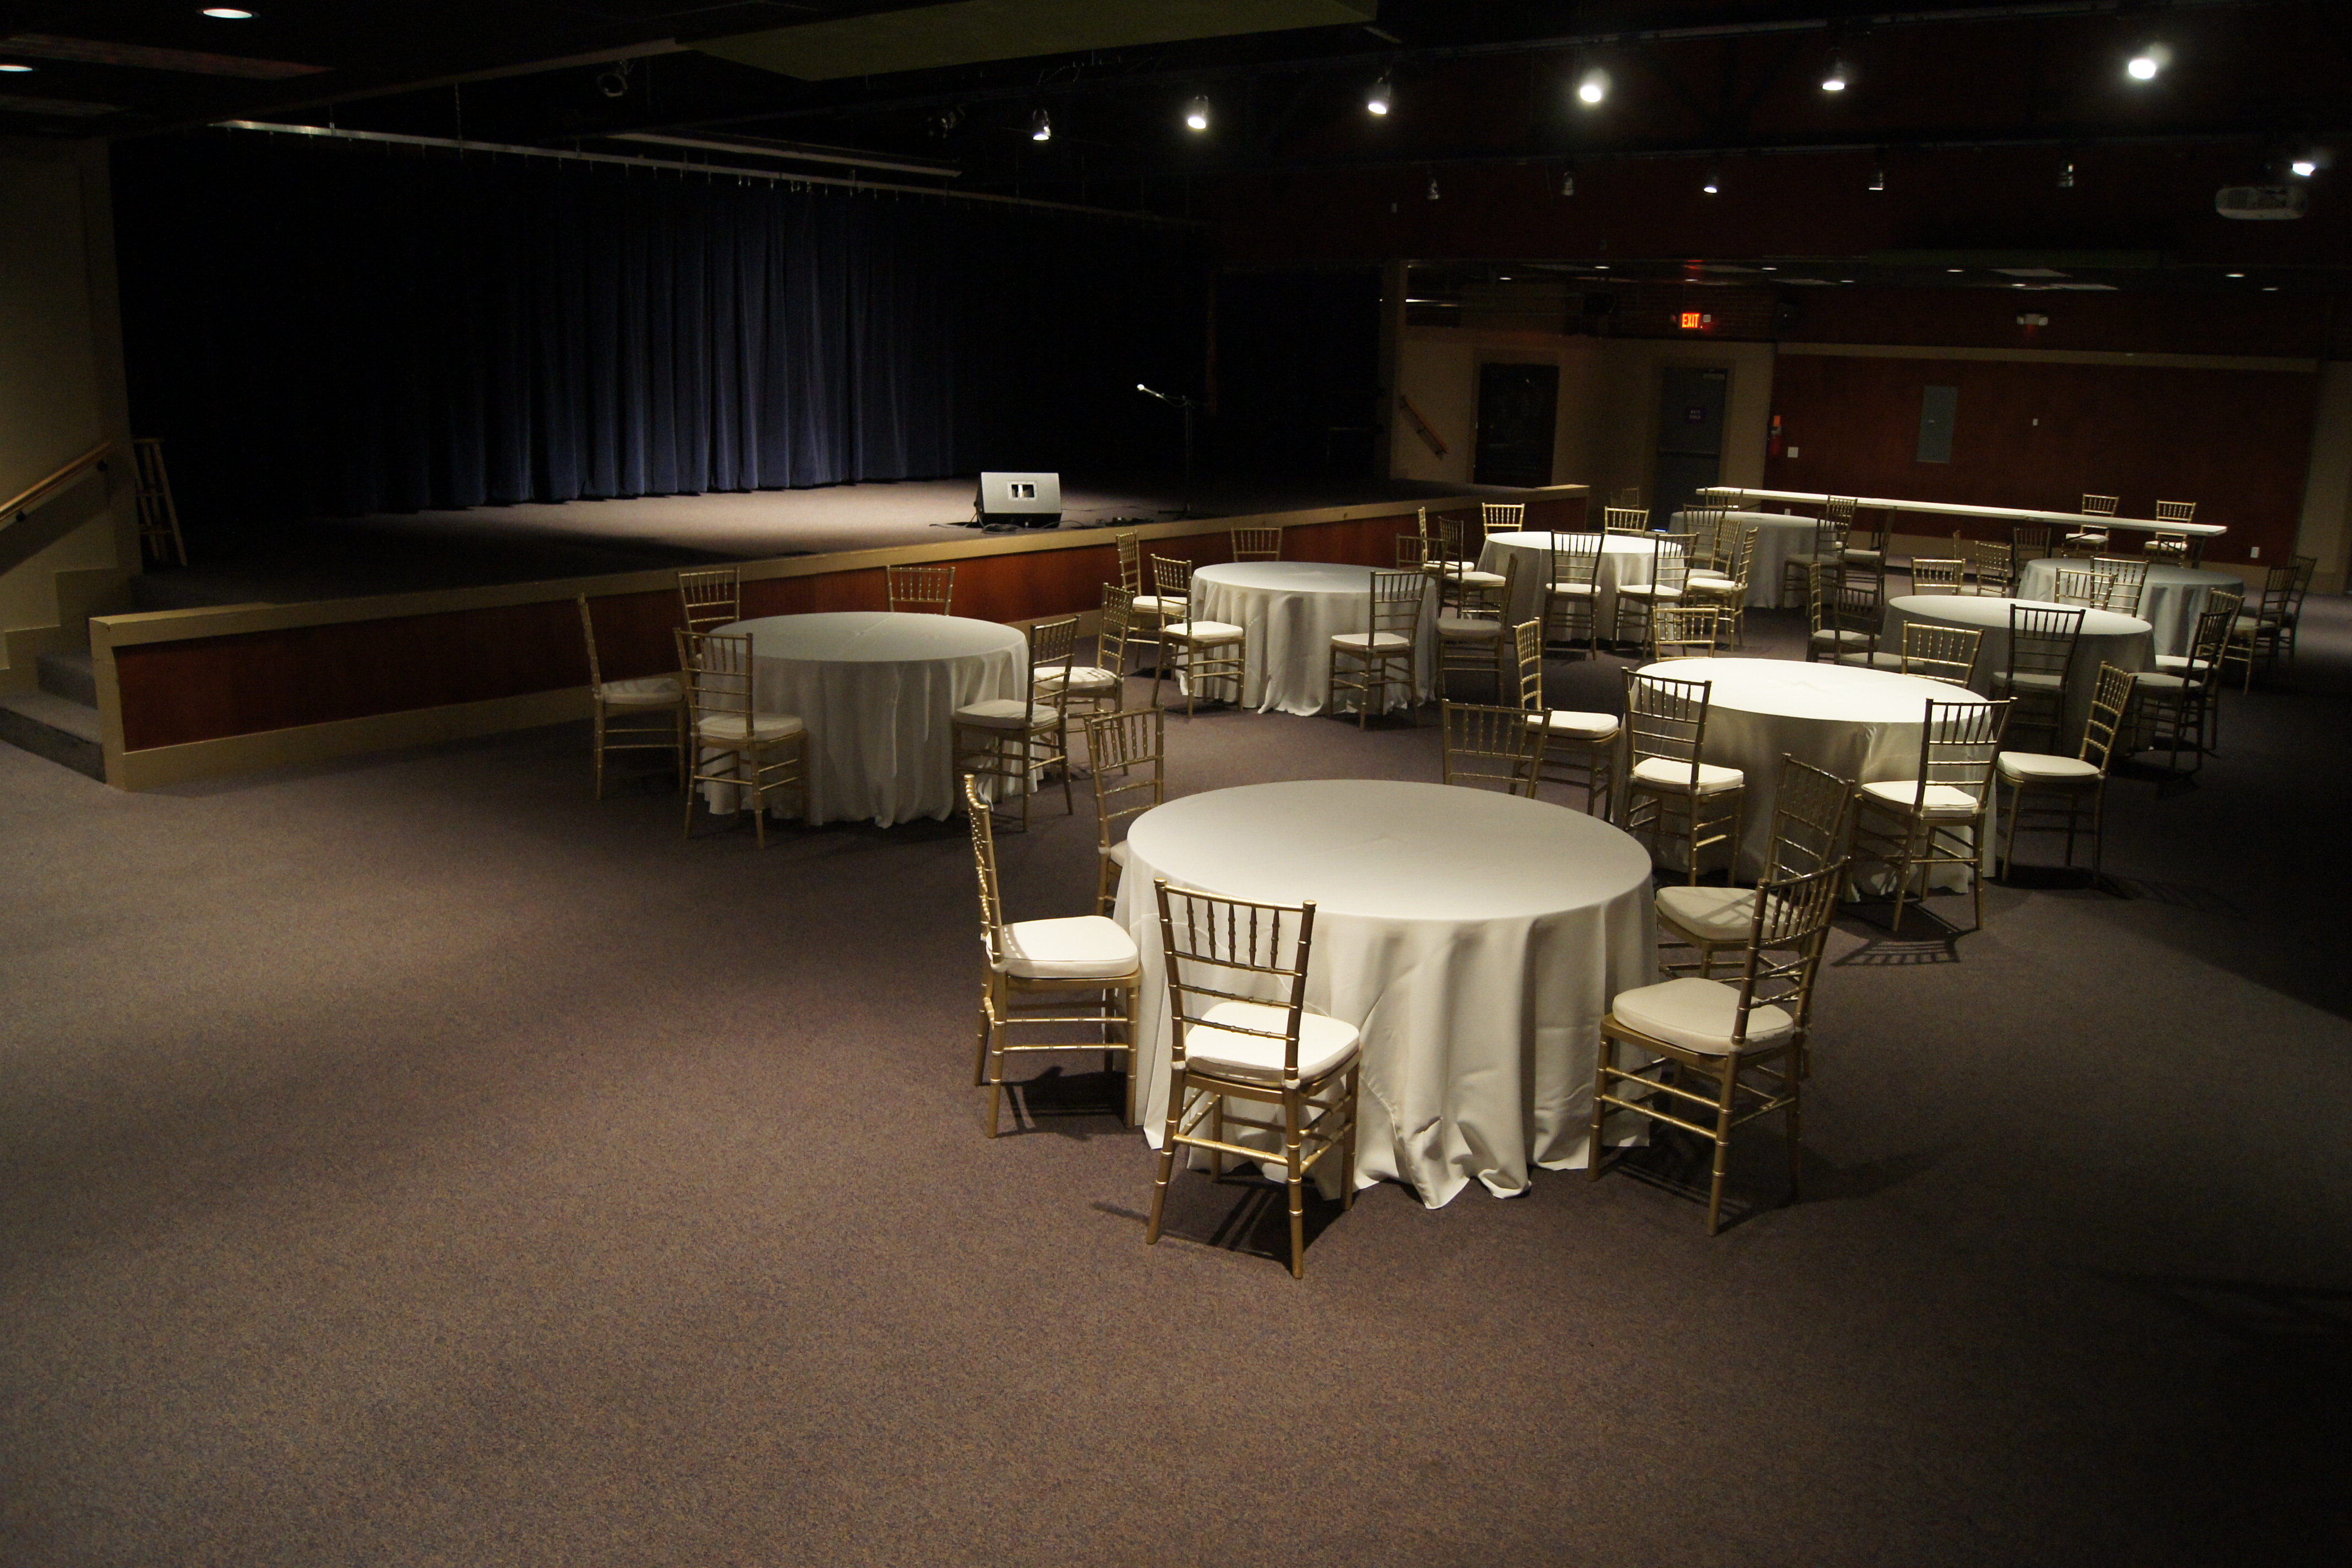 Round Tables in the Mane Room